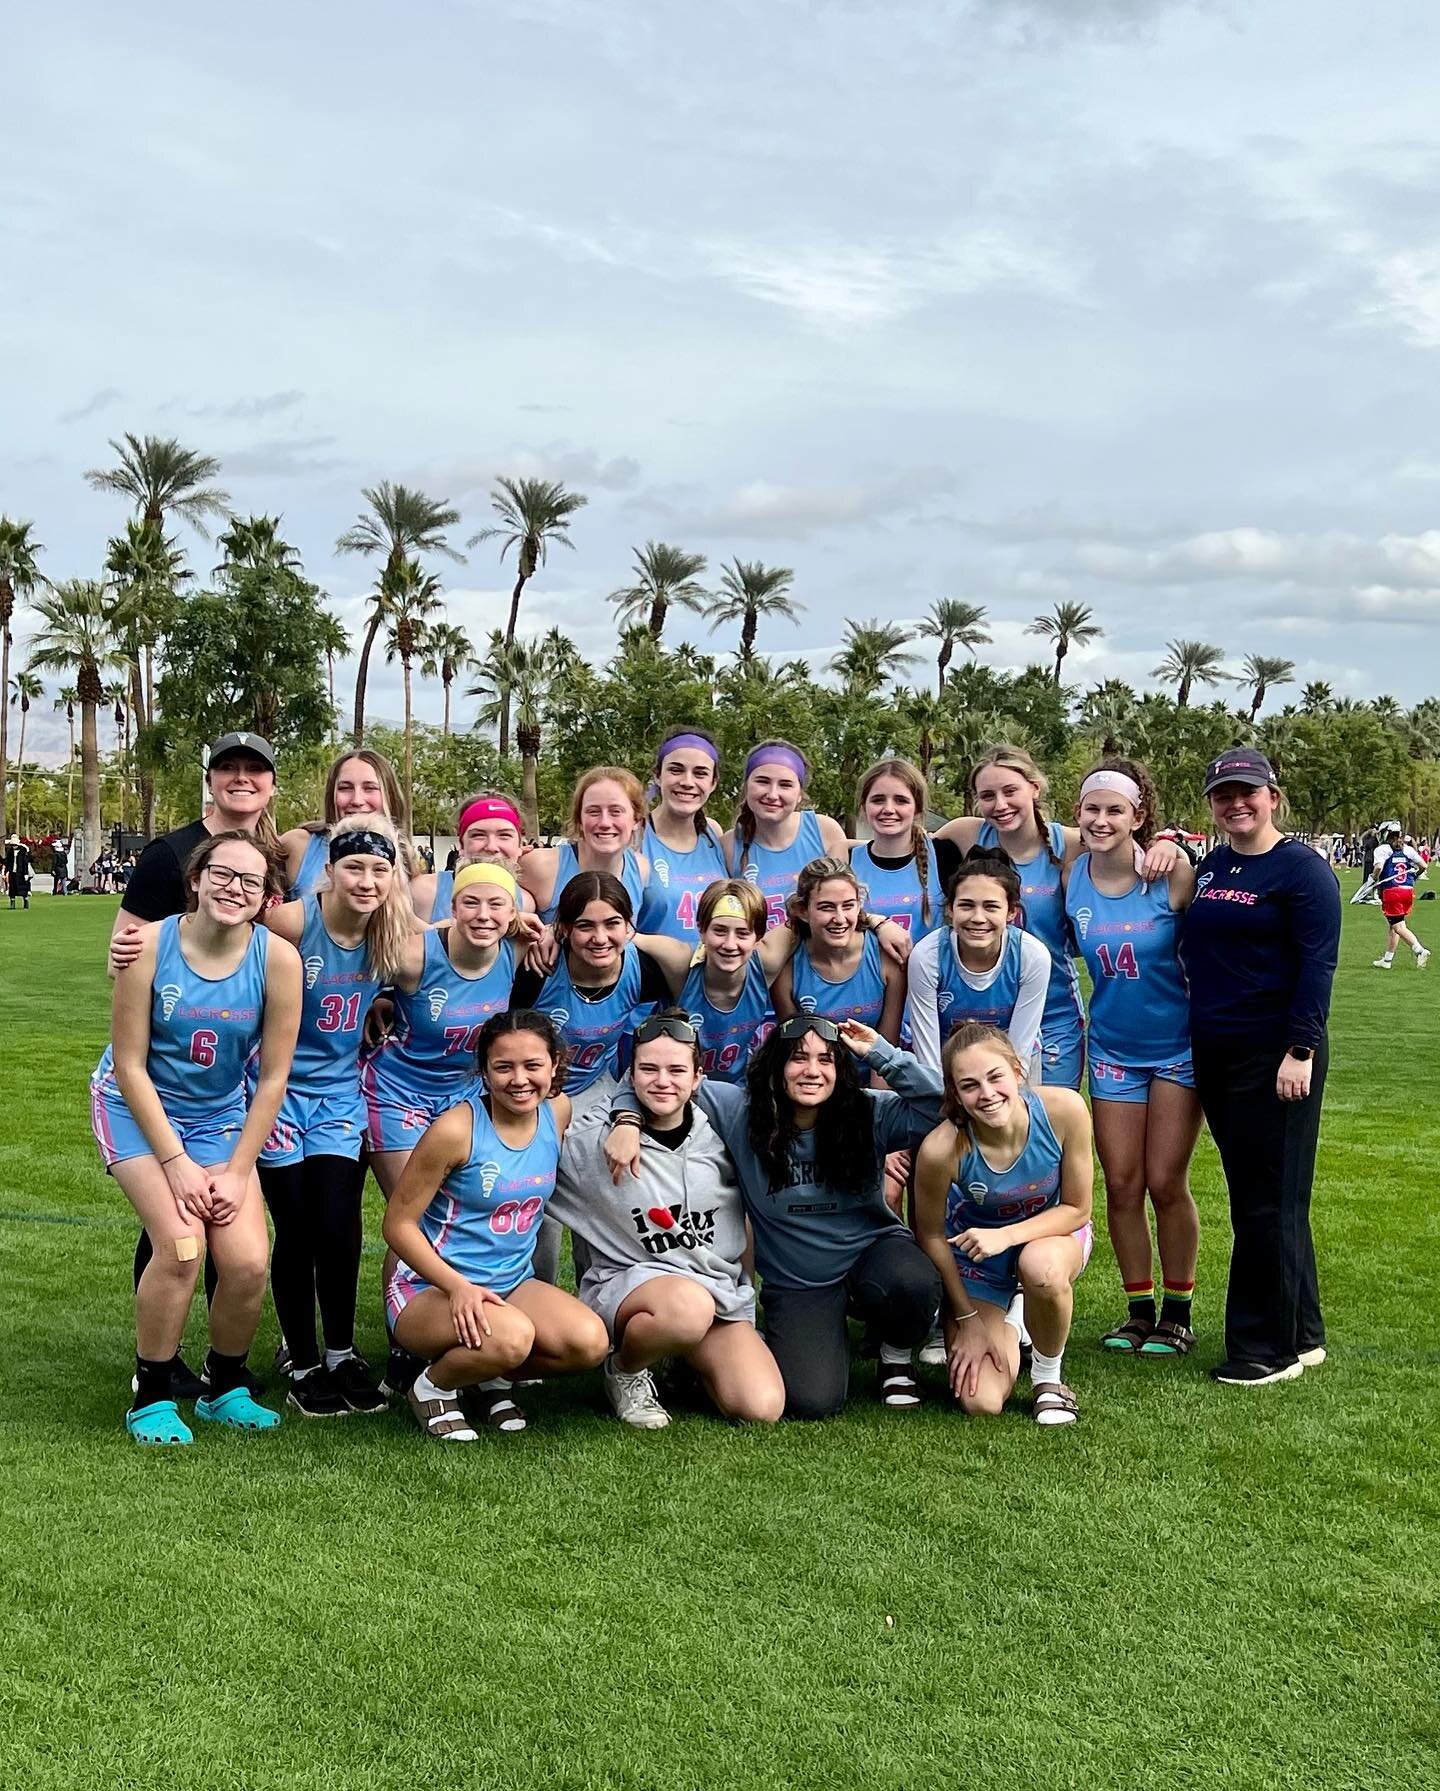 253 Lacrosse Cascade had a memorable weekend at Sand Storm! They faced tough competition and showed outstanding sportsmanship, grit, and determination in the face of many challenges. The coaches are so proud of the way they&rsquo;ve come together and